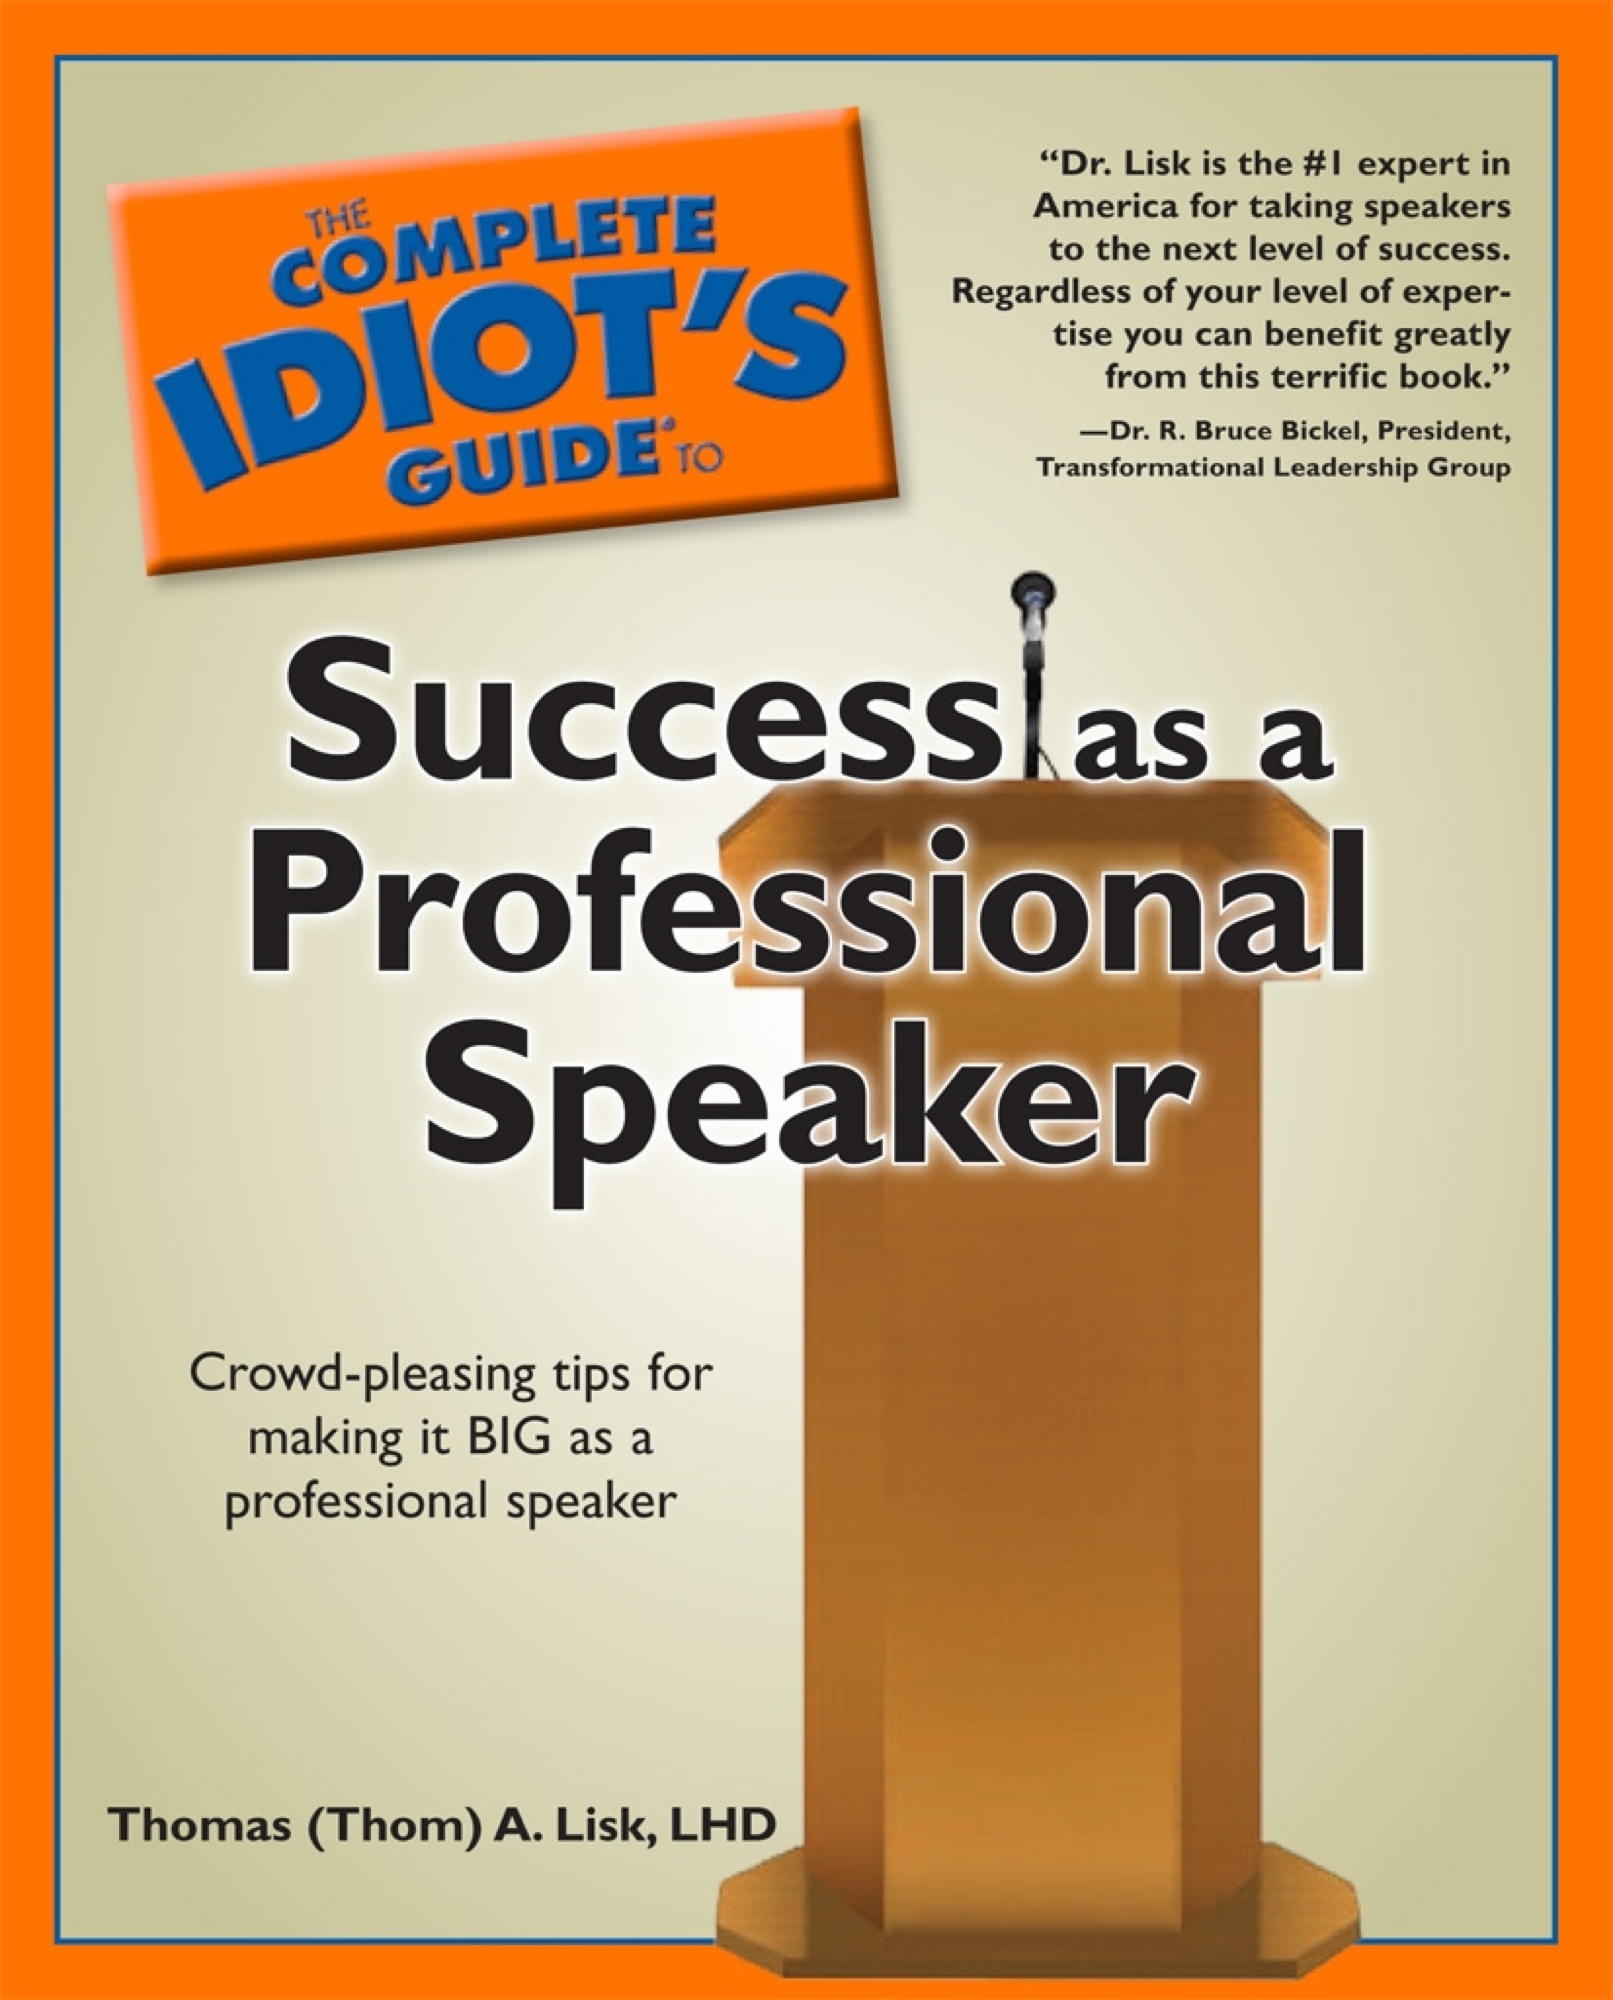 The Complete Idiot's Guide to Success as a Professional Speaker